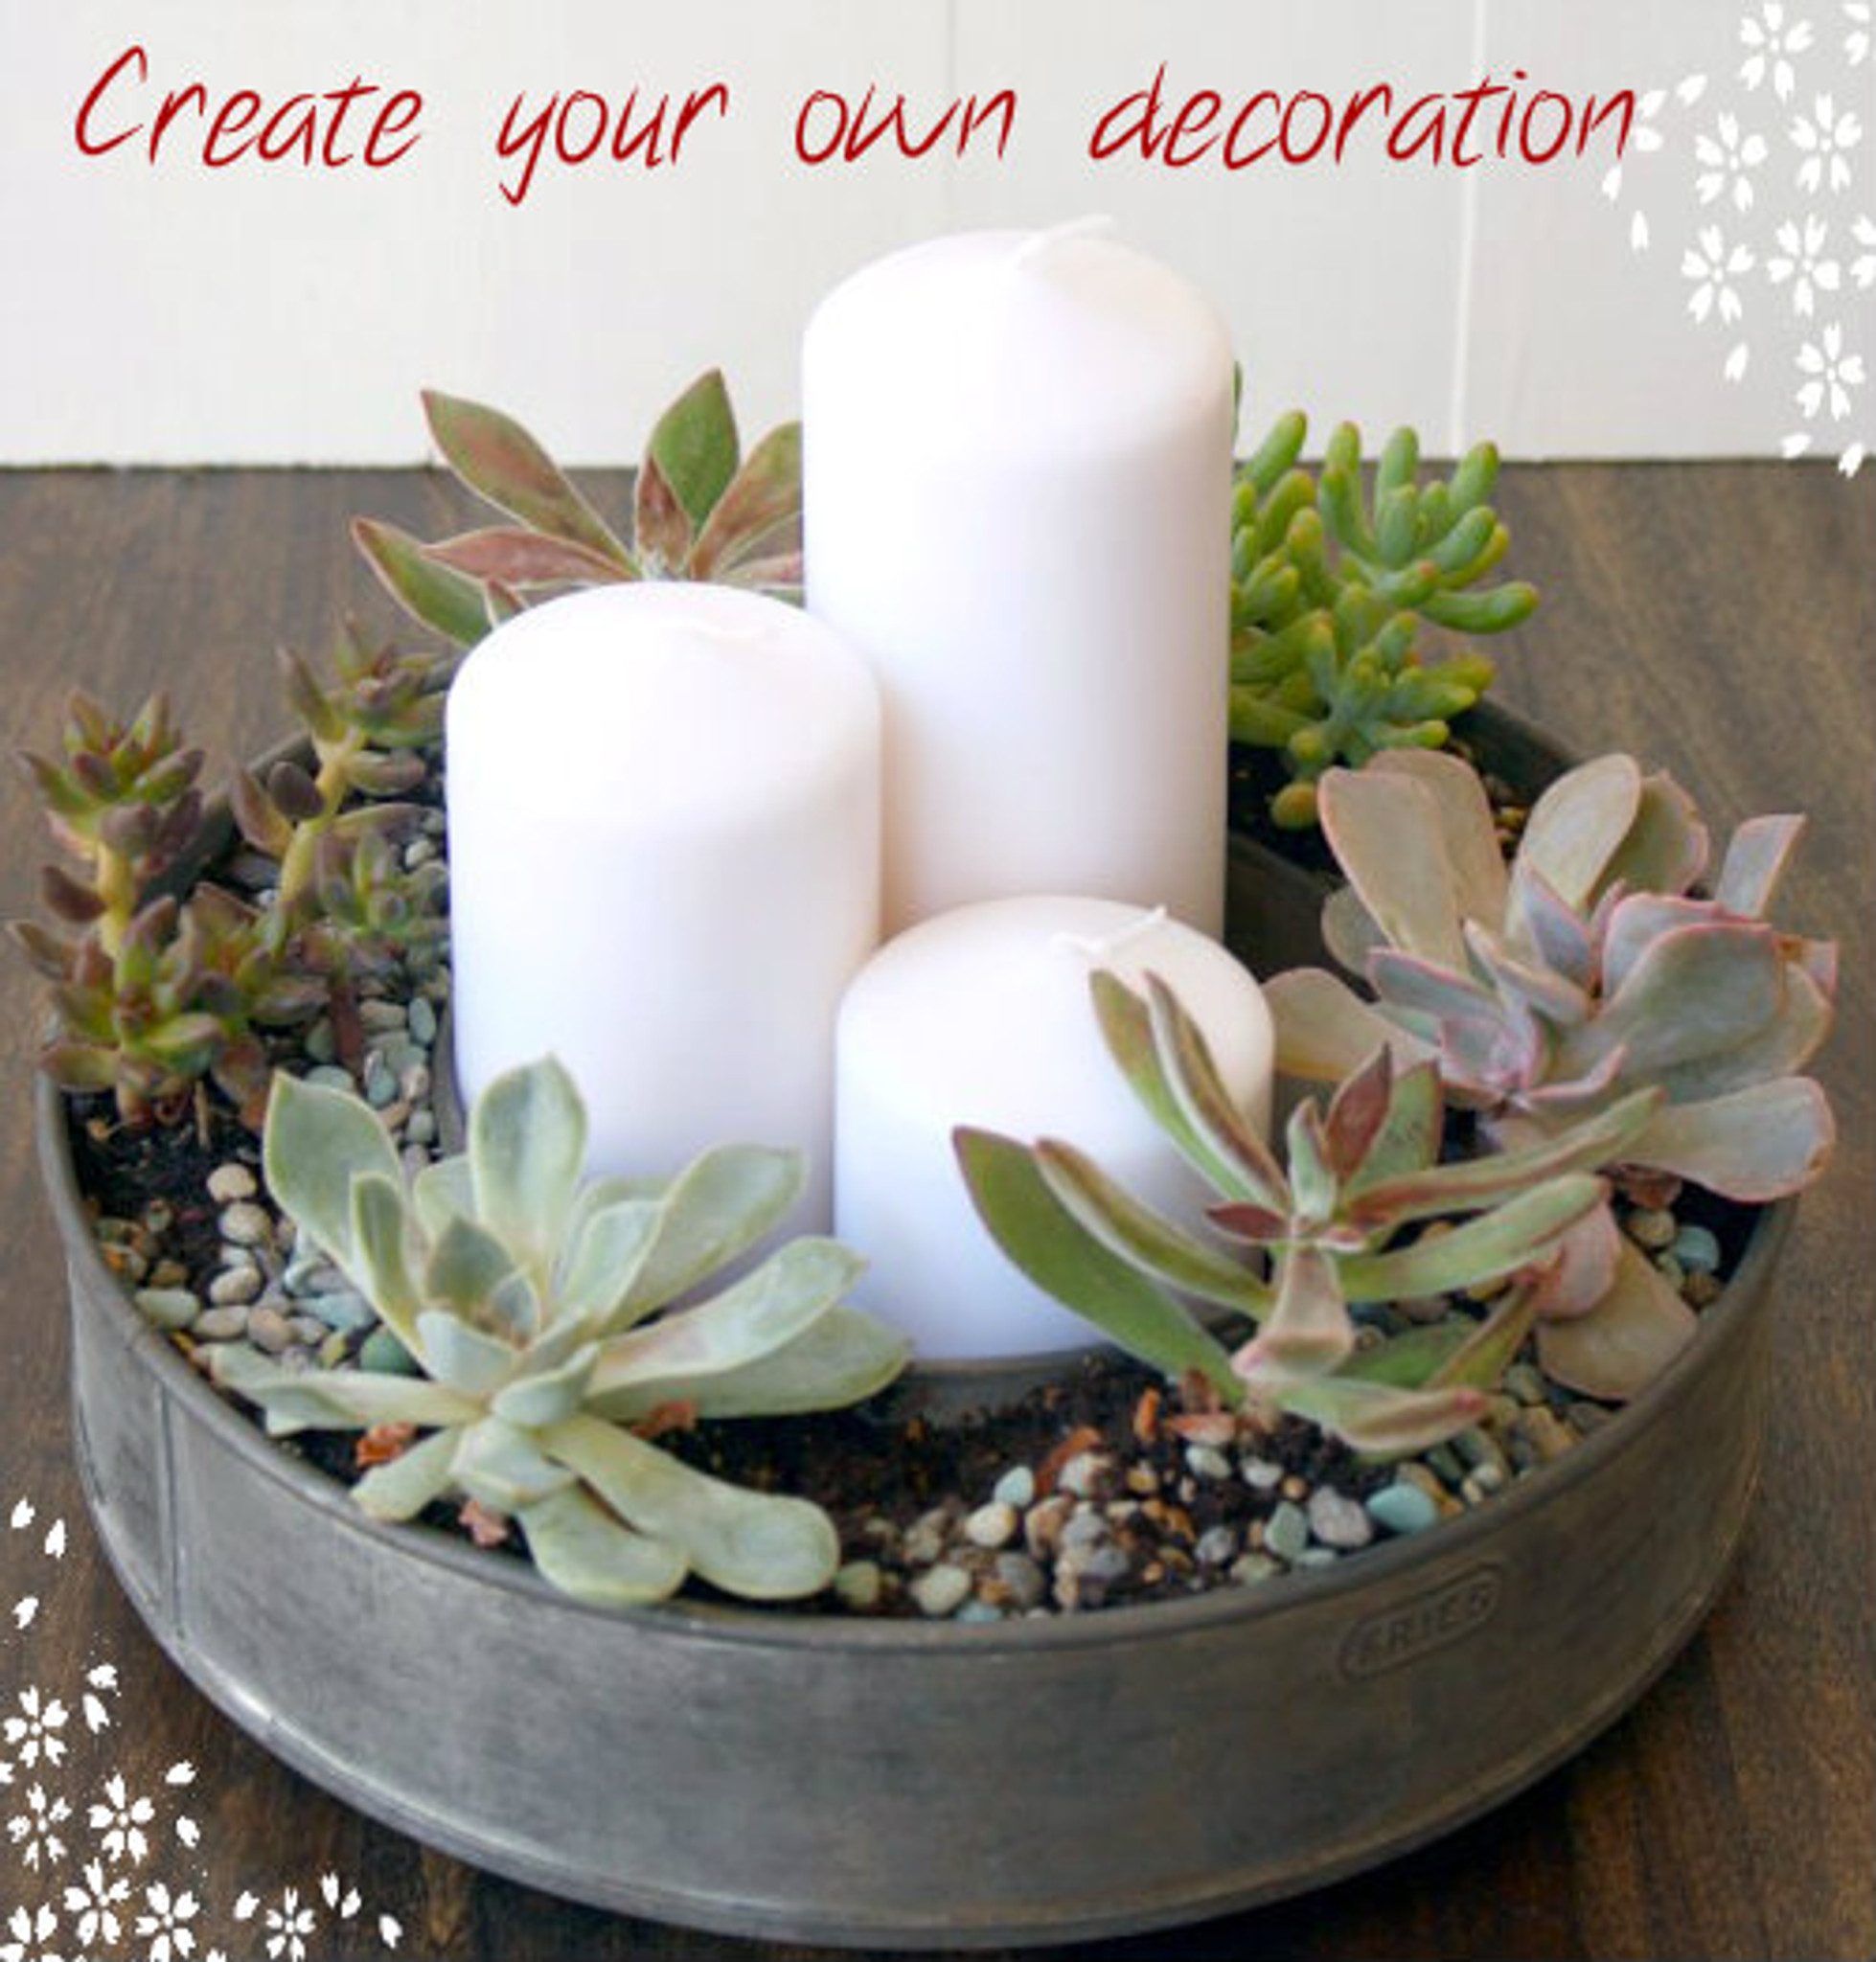 Example of planted Succulents To create nice decoration.